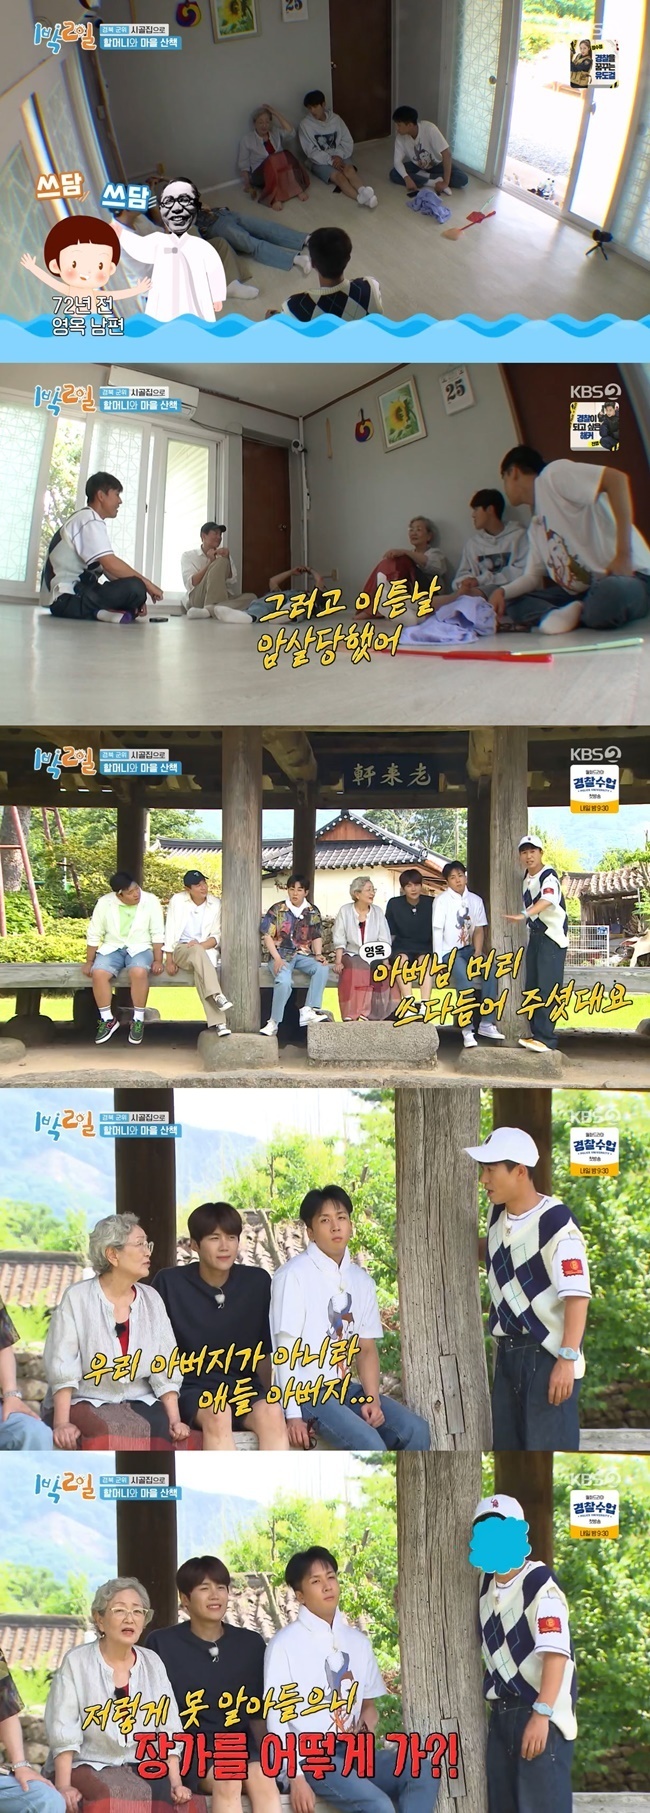 Kim Young-ok reveals story about Bai Fan Kim GuIn the second story of KBS 2TV Season 4 for 1 Night 2 Days (hereinafter referred to as 1 night and 2 days) To the City House featured on August 8, the members who left for the Gyeongbuk Army were drawn with memories of summer vacation.Kim Young-ok said, This is funny, but when Husband was a child, Han River was a swimming pool soon.One day, Kim Gu came to play in the water at Han River. Kim Gu touched his head and said he was Assassinated the next day, and he said it was shocking, he added.Kim Jong-min then told the members of the story and explained that Kim Young-oks father.